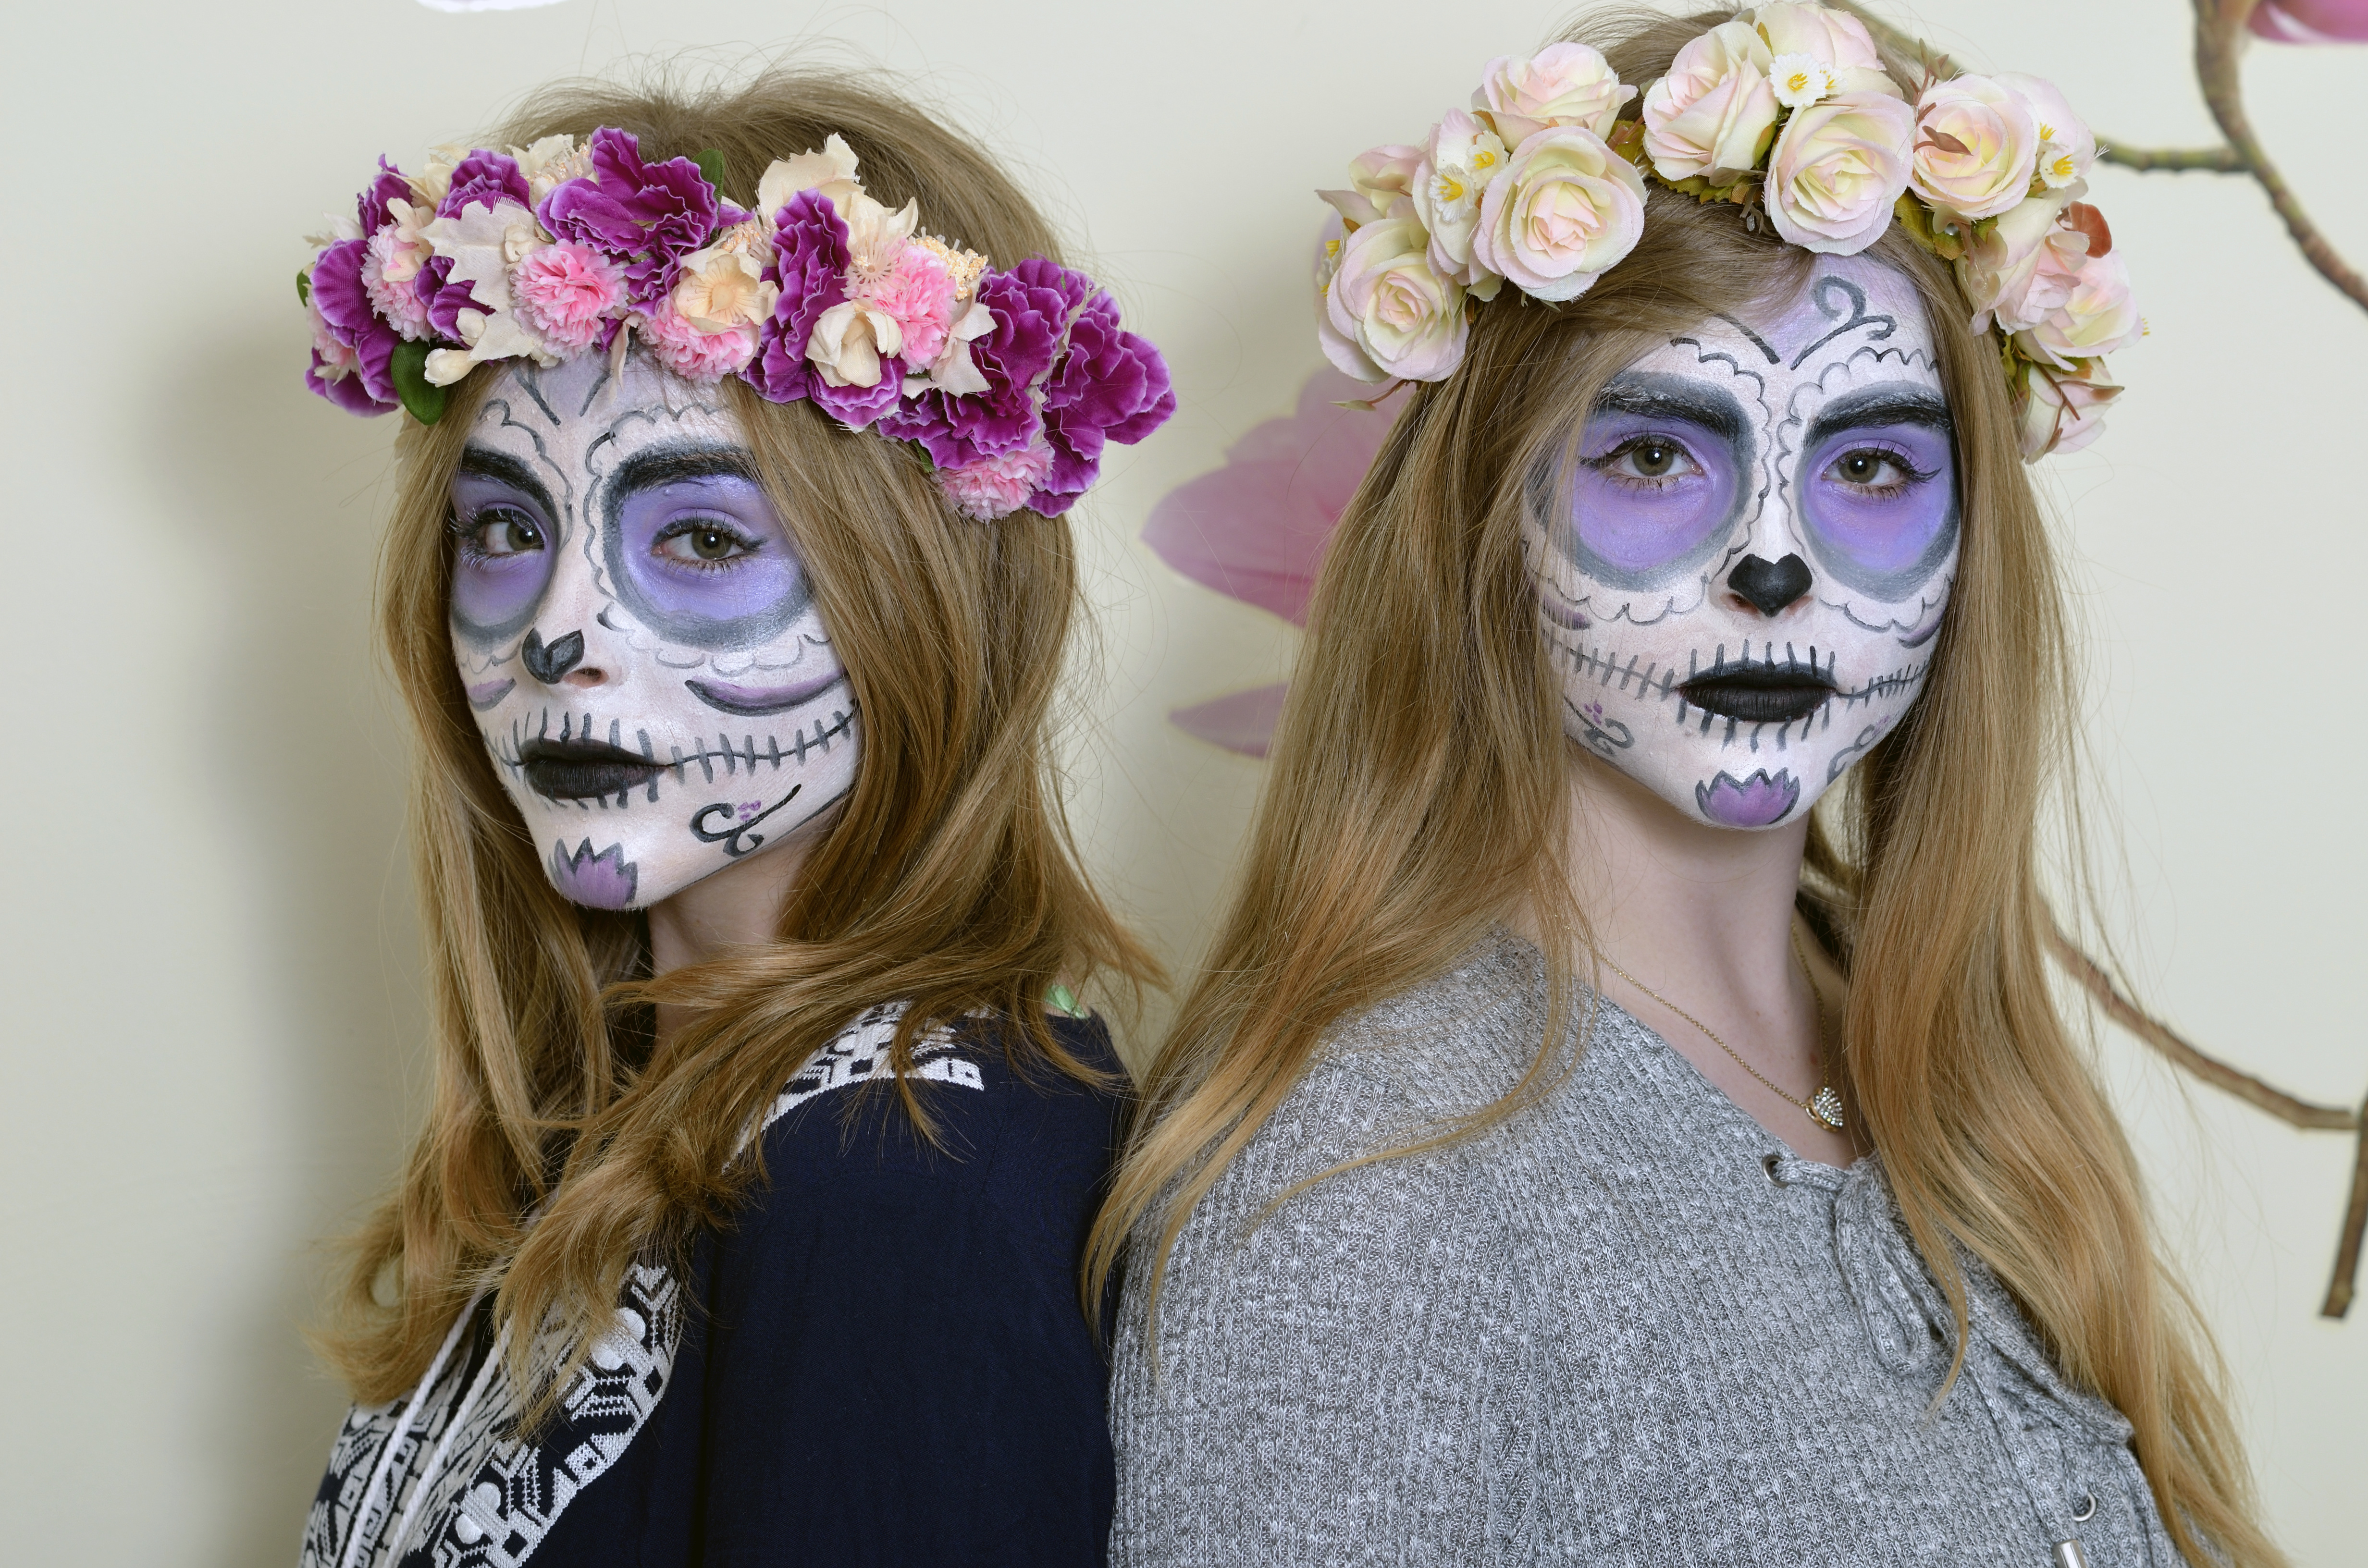 Halloween two blonde girls with makeup Mexican death mask and with a wreath of flowers